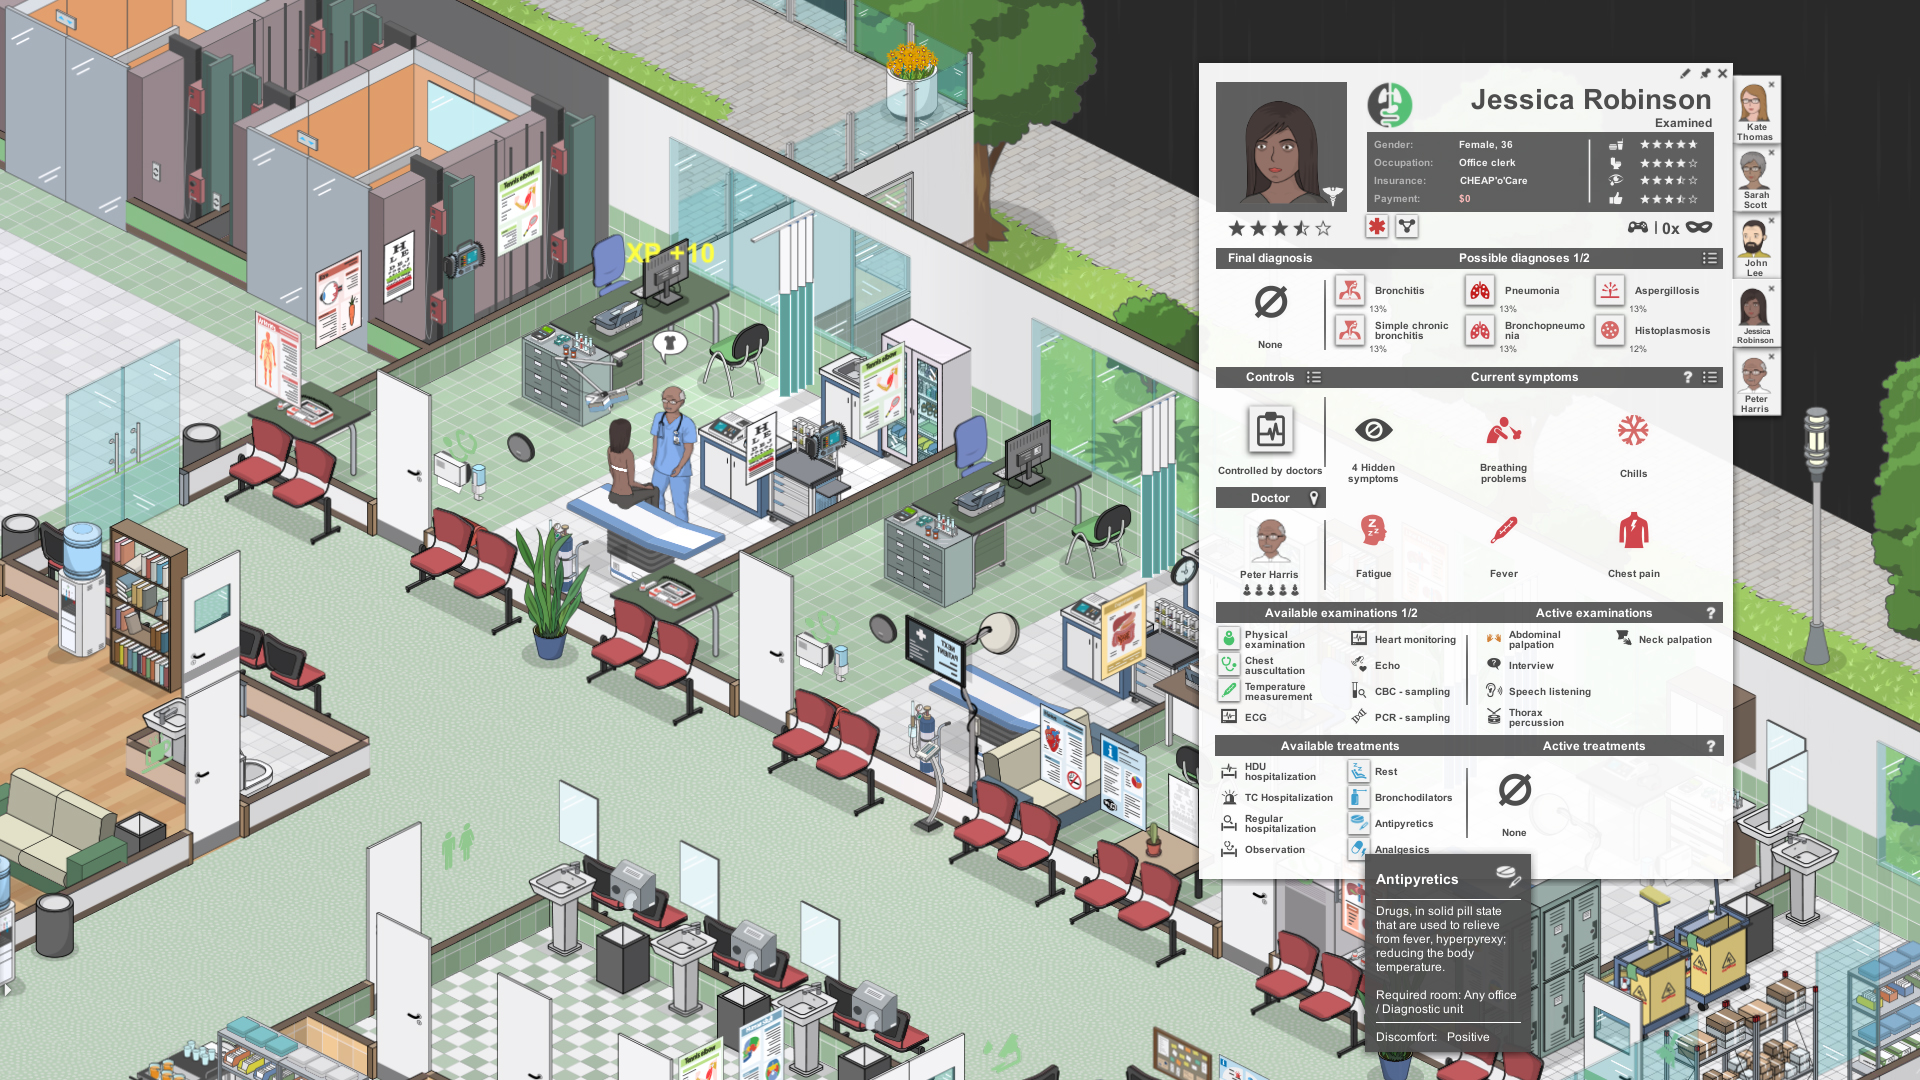 A character sheet in Project Hospital